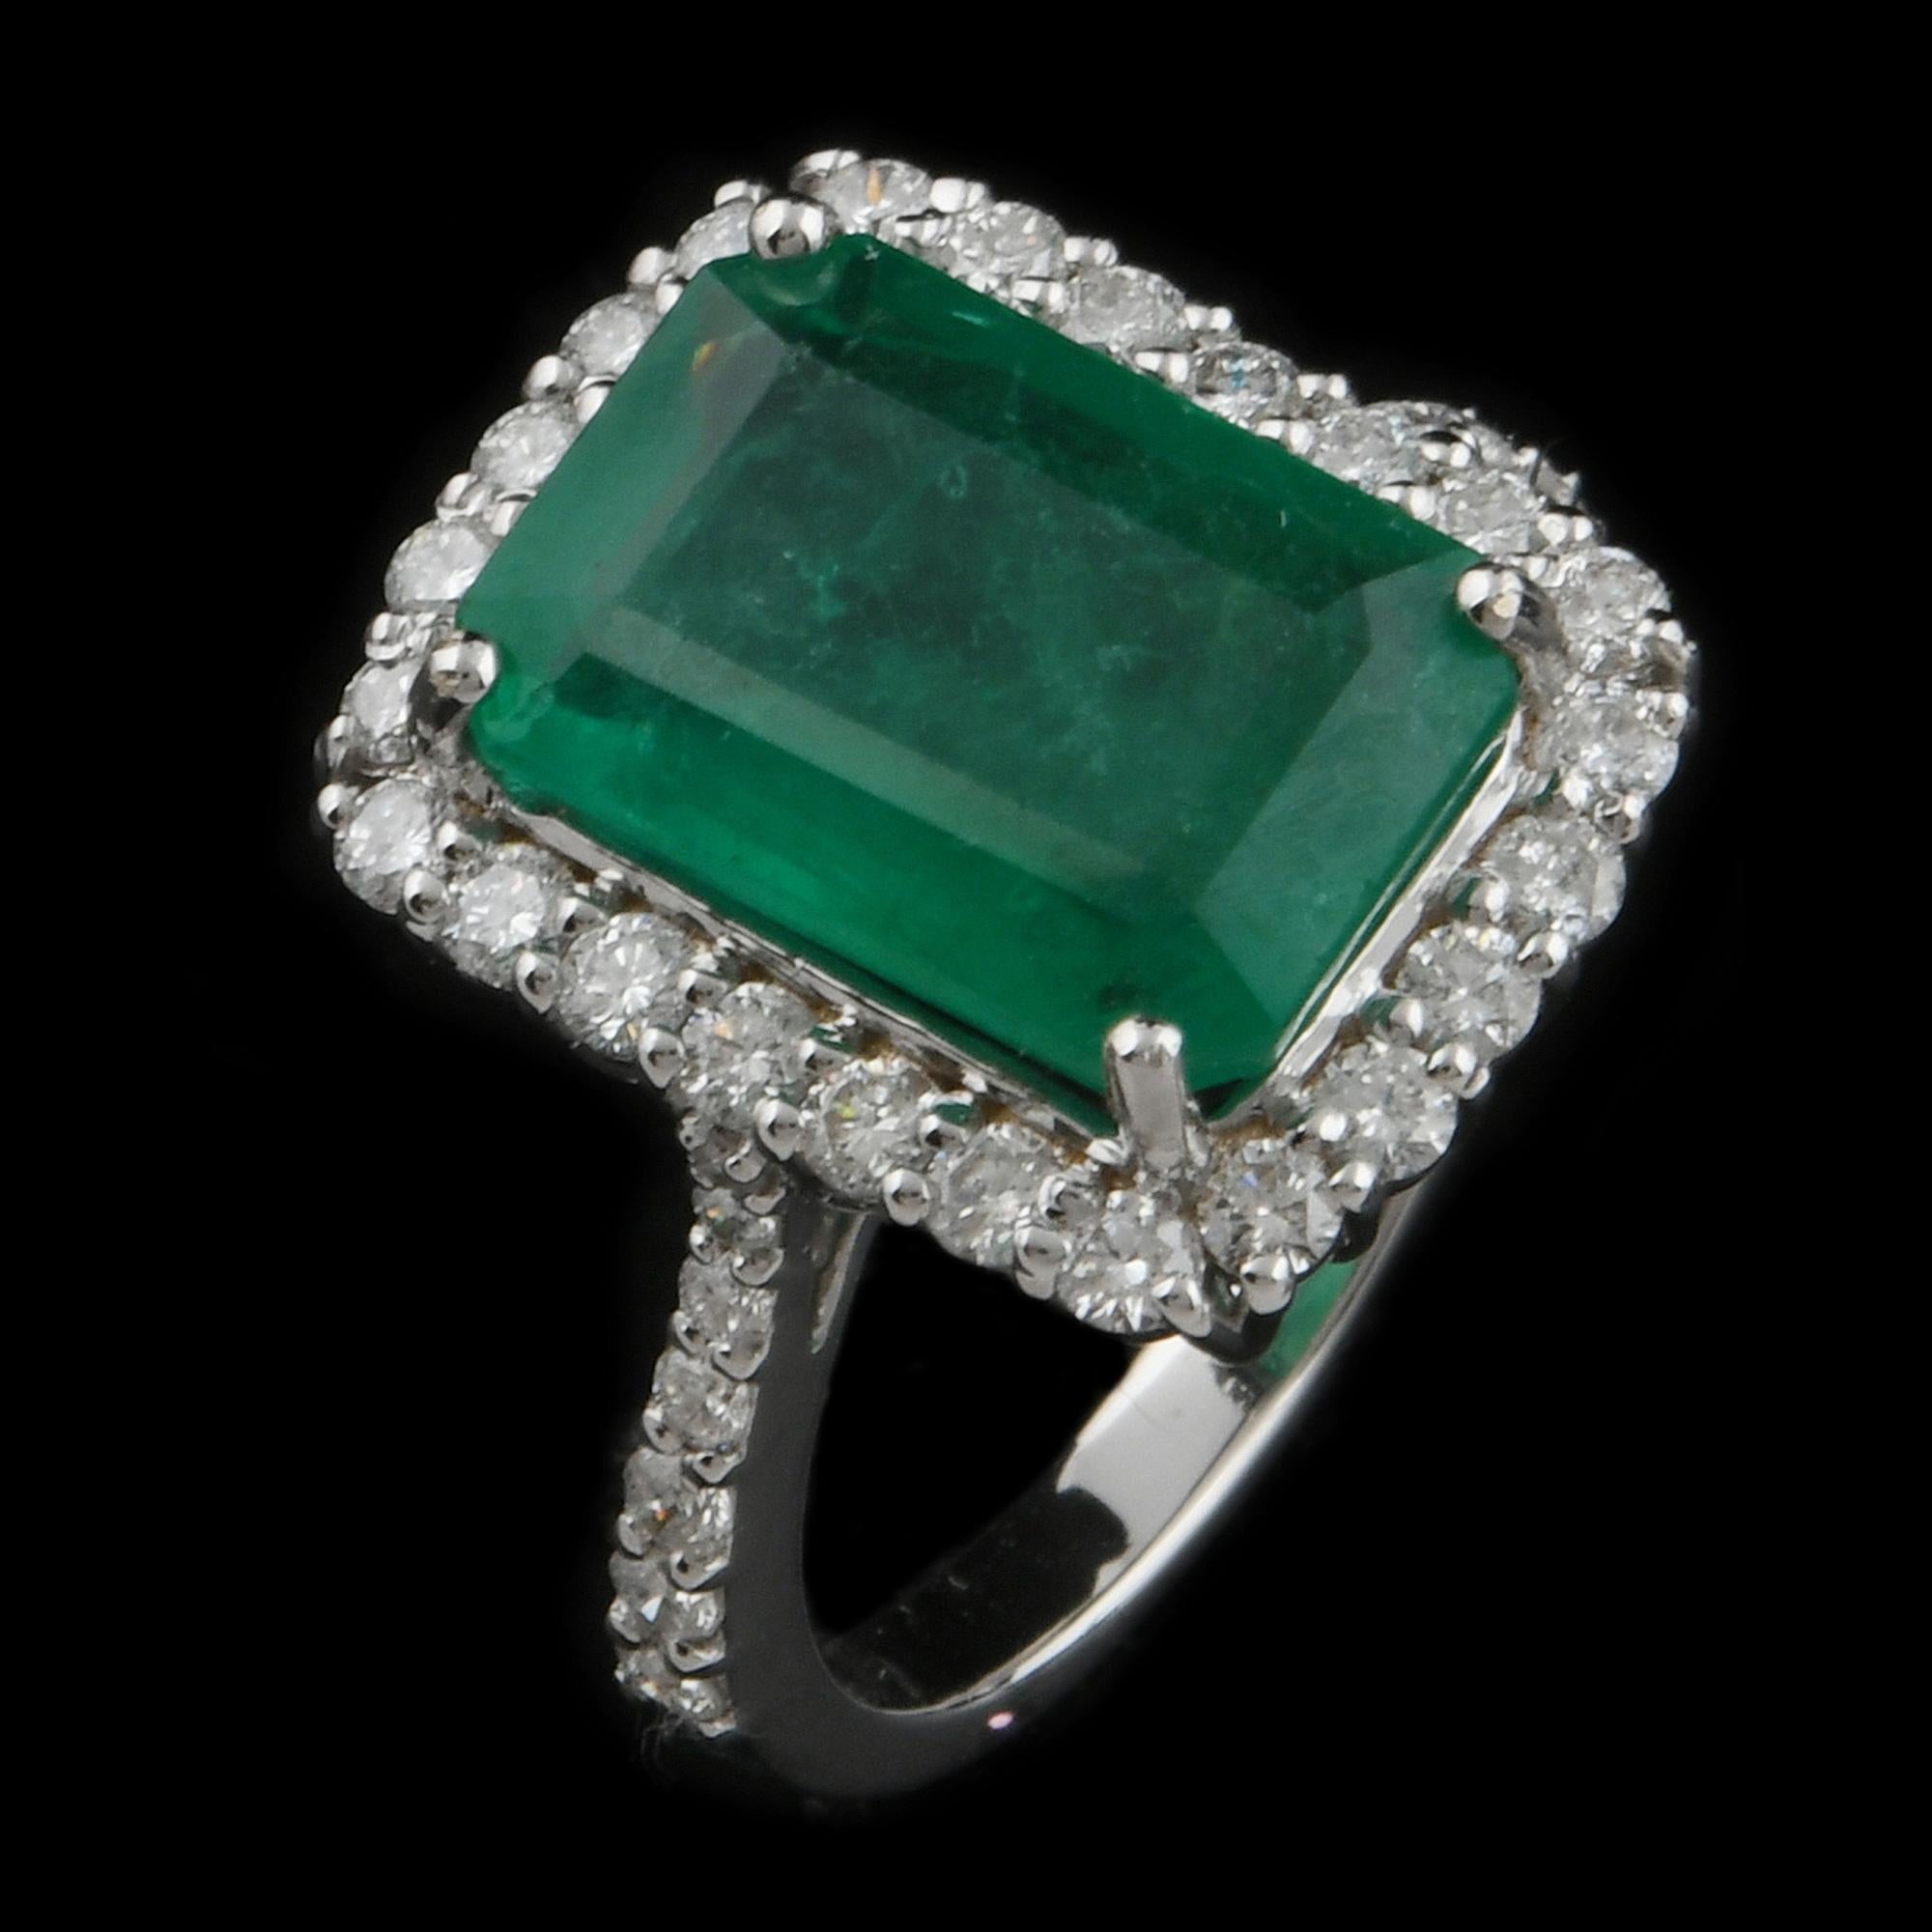 Handcrafted with care and precision, this ring features a stunning 5.02 ct. Emerald Cut Zambian Emerald at its center, surrounded by halo of sparkling diamonds. This ring is available in 18k Rose Gold/White Gold/Yellow Gold.

This is a perfect Gift